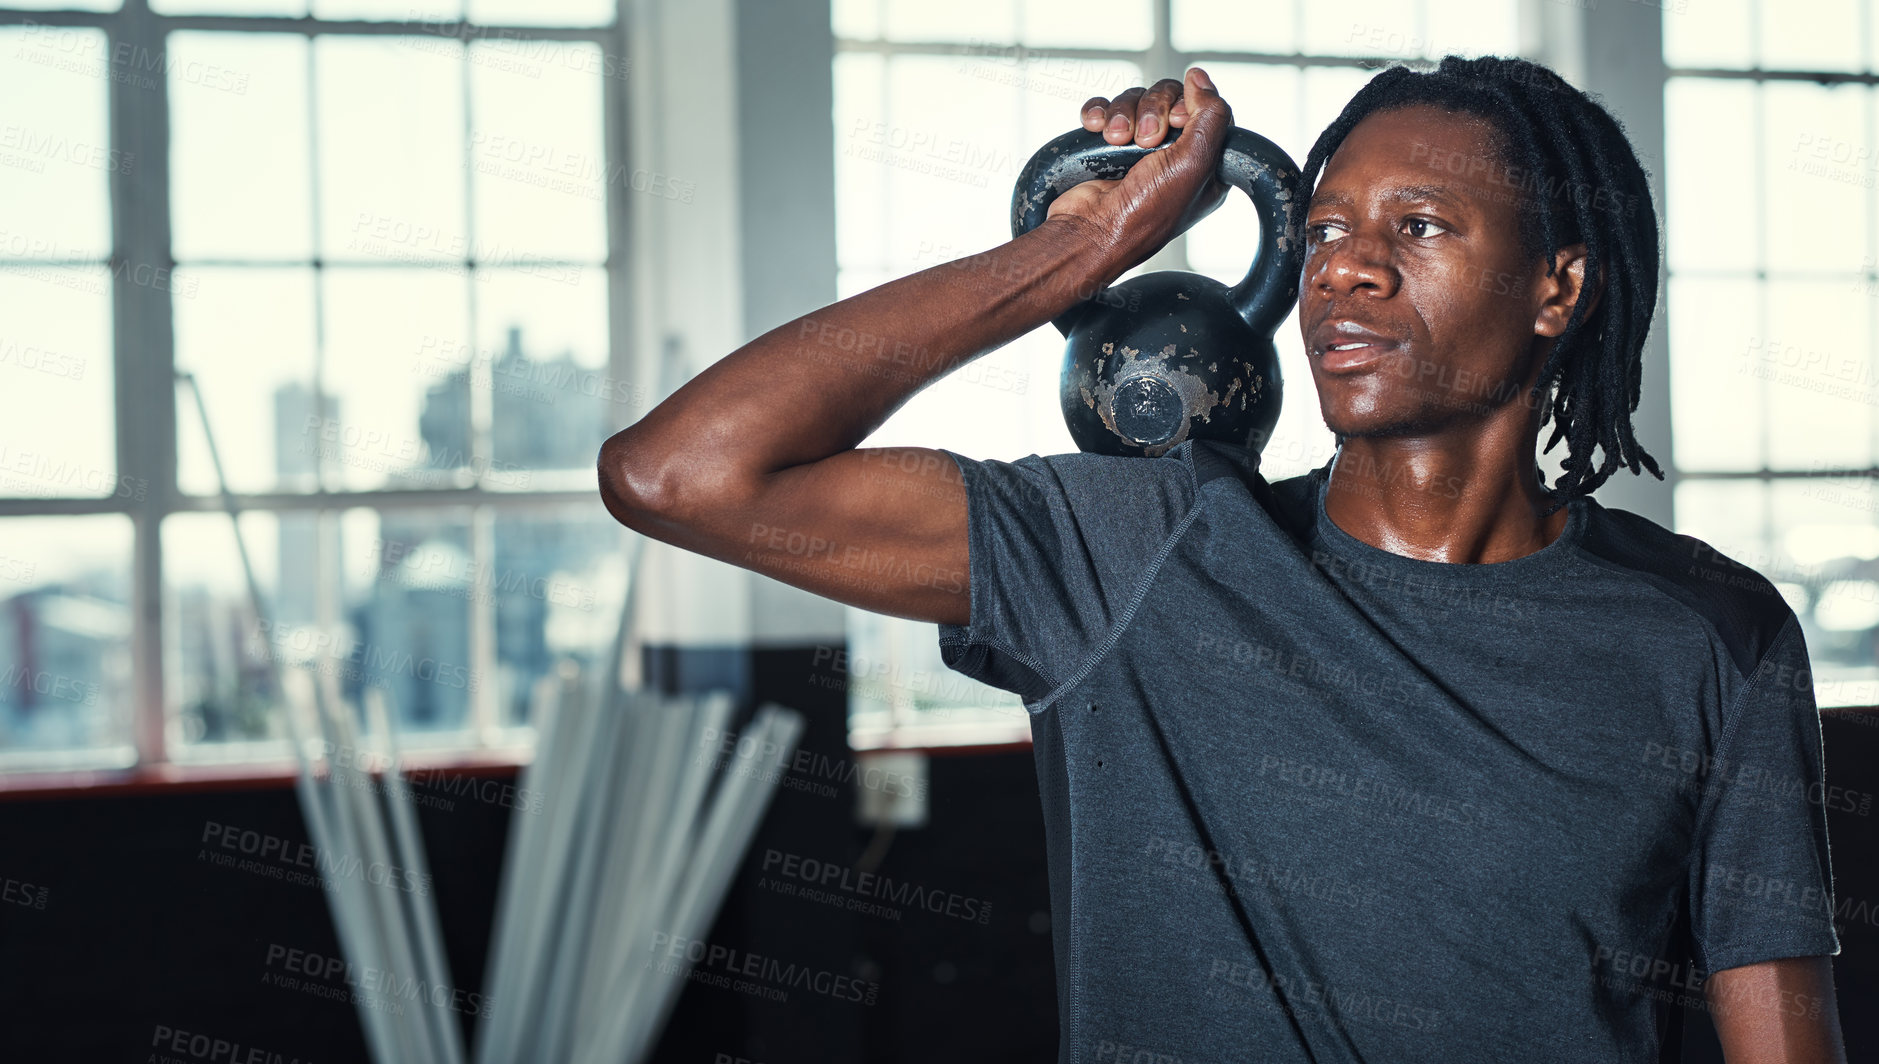 Buy stock photo Shot of a young man lifting kettlebells in a gym